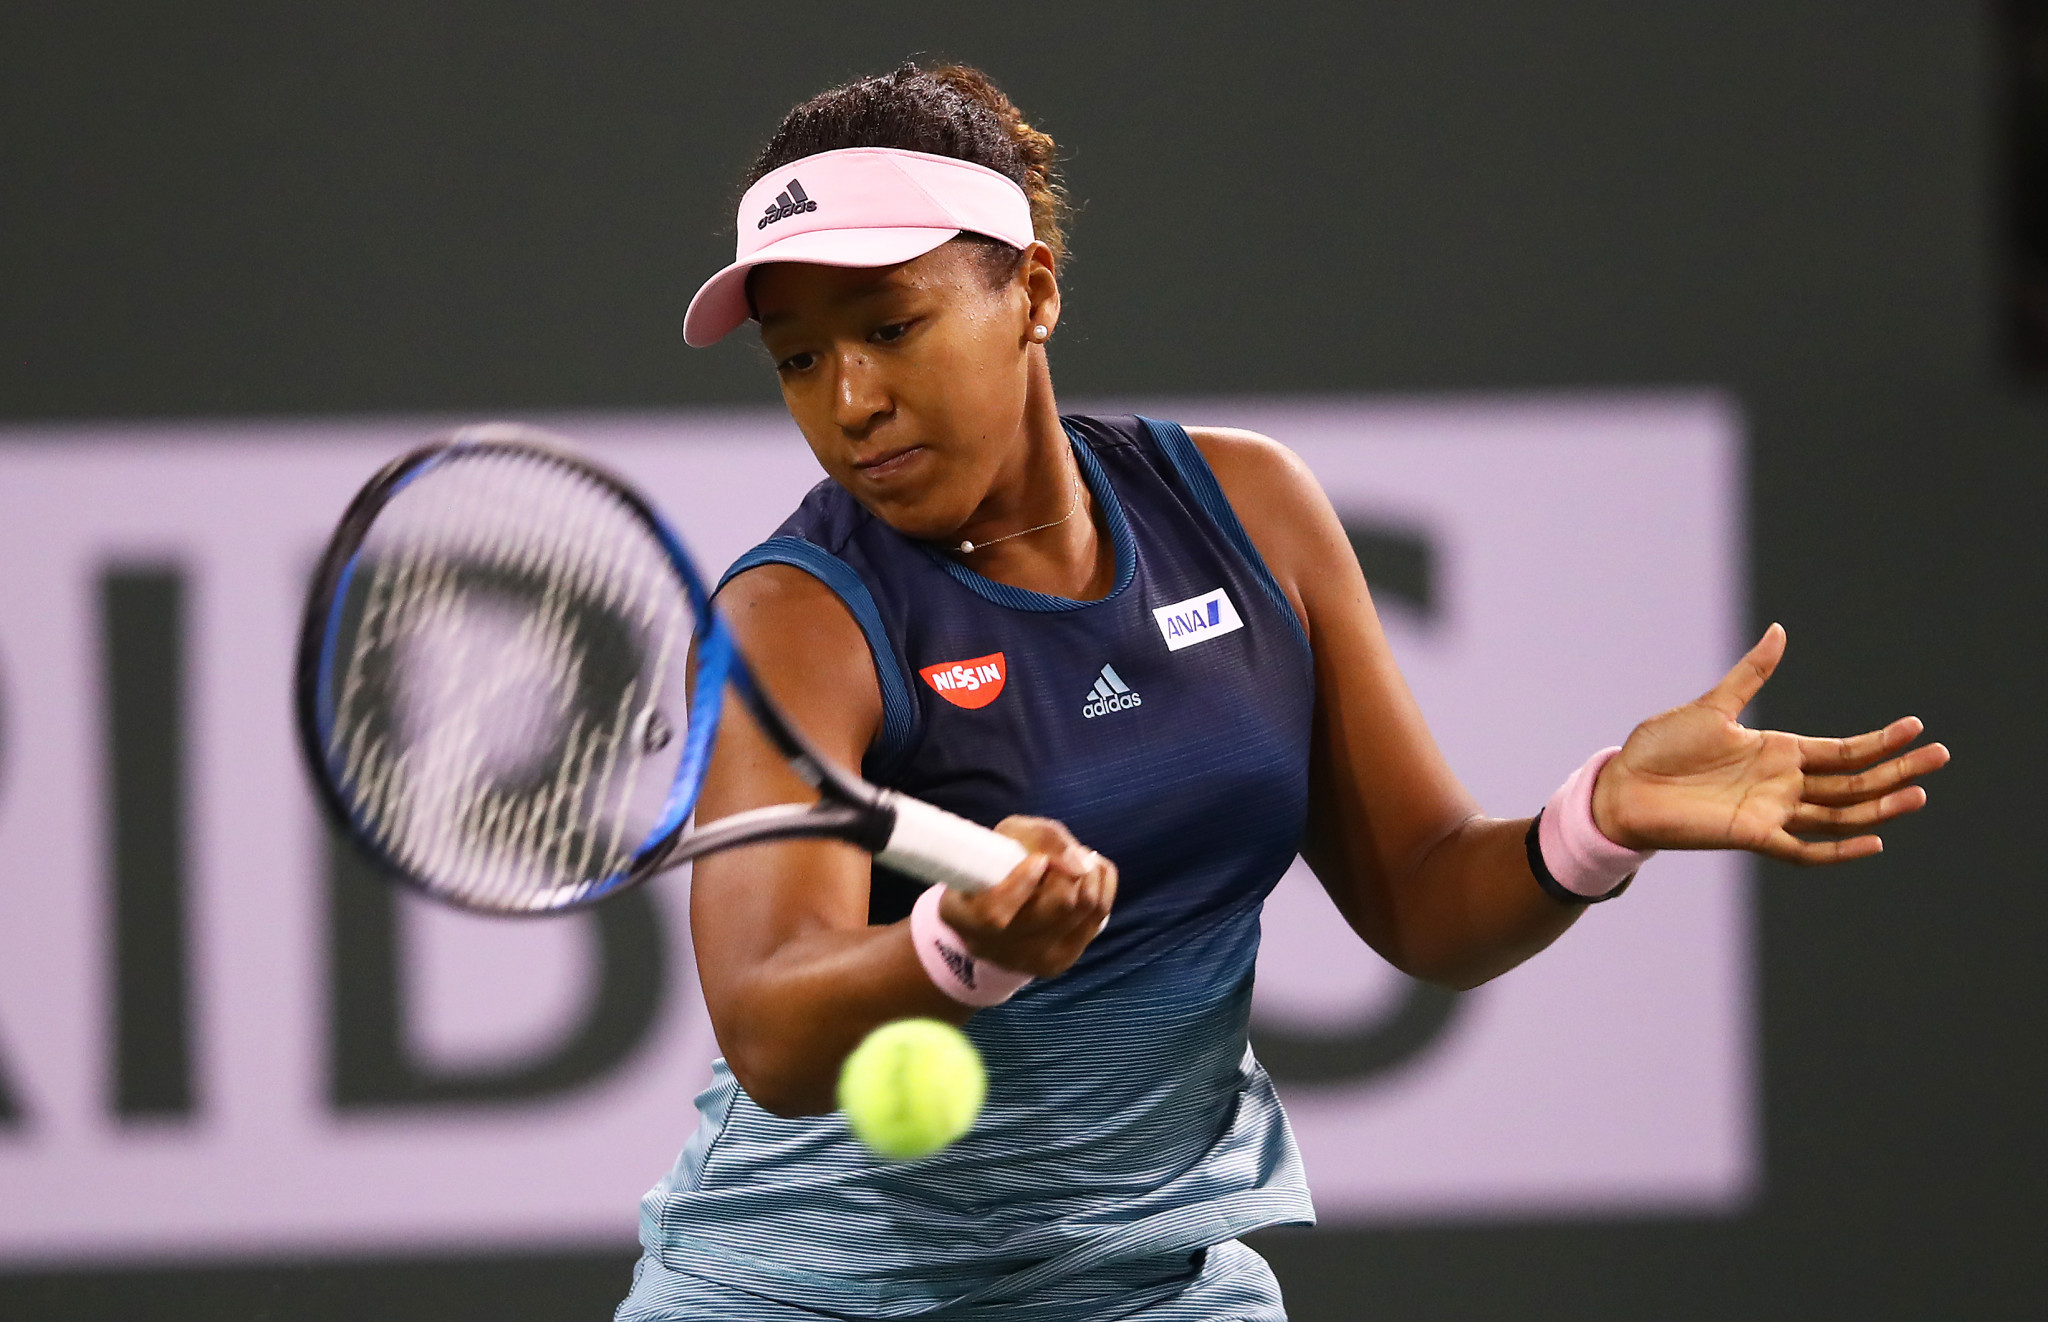 Women's world number one Naomi Osaka also booked her place in the third round ©Getty Images